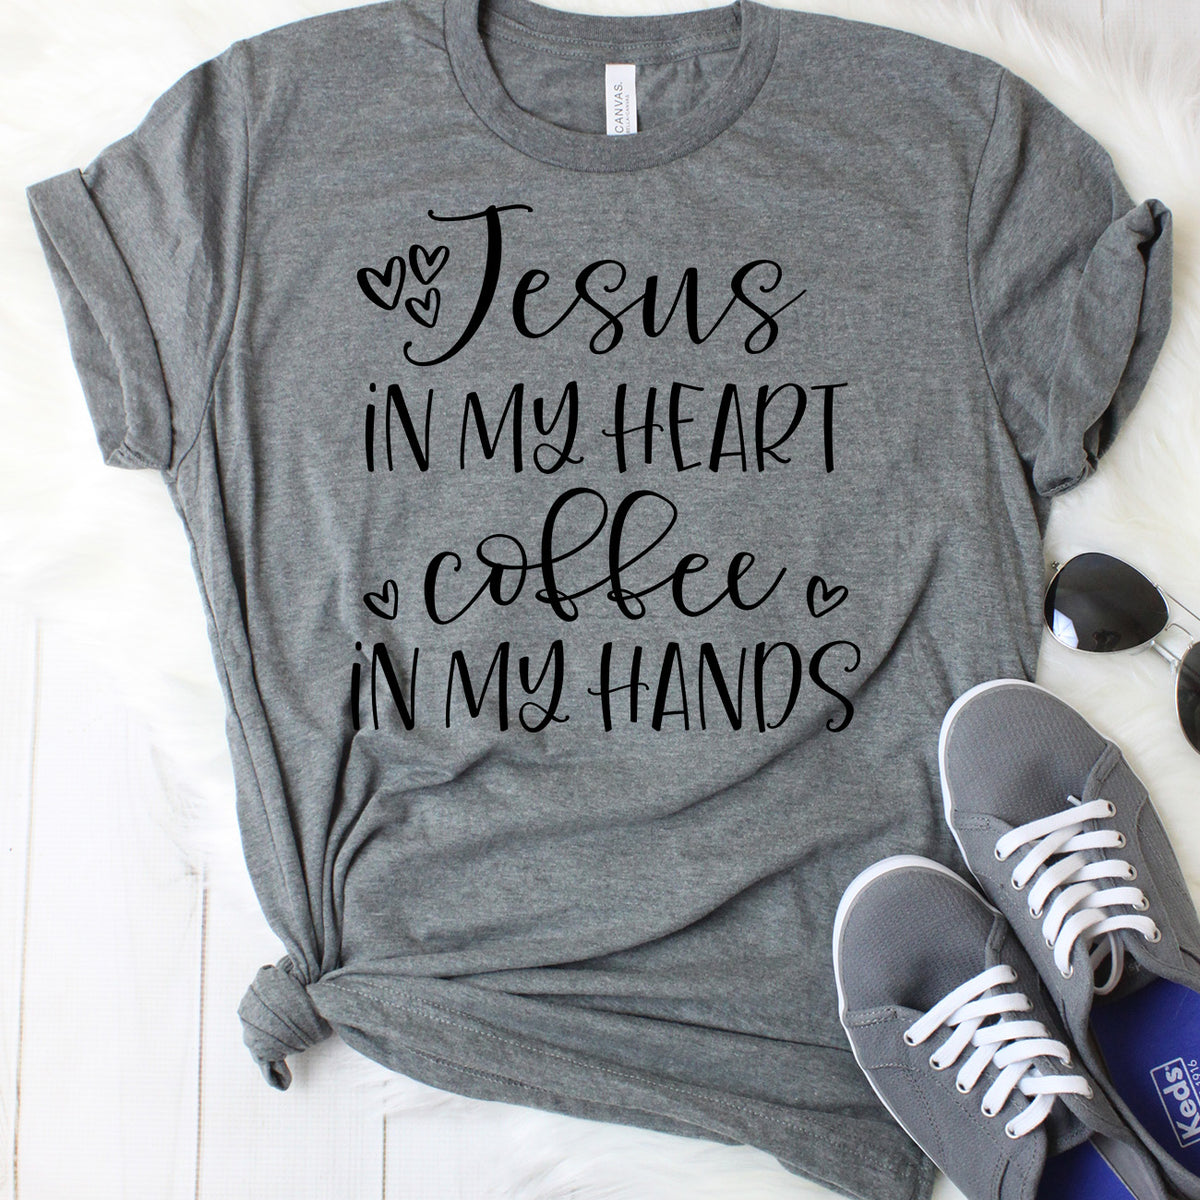 Jesus in my Heart and Coffee in my Hands T-Shirt